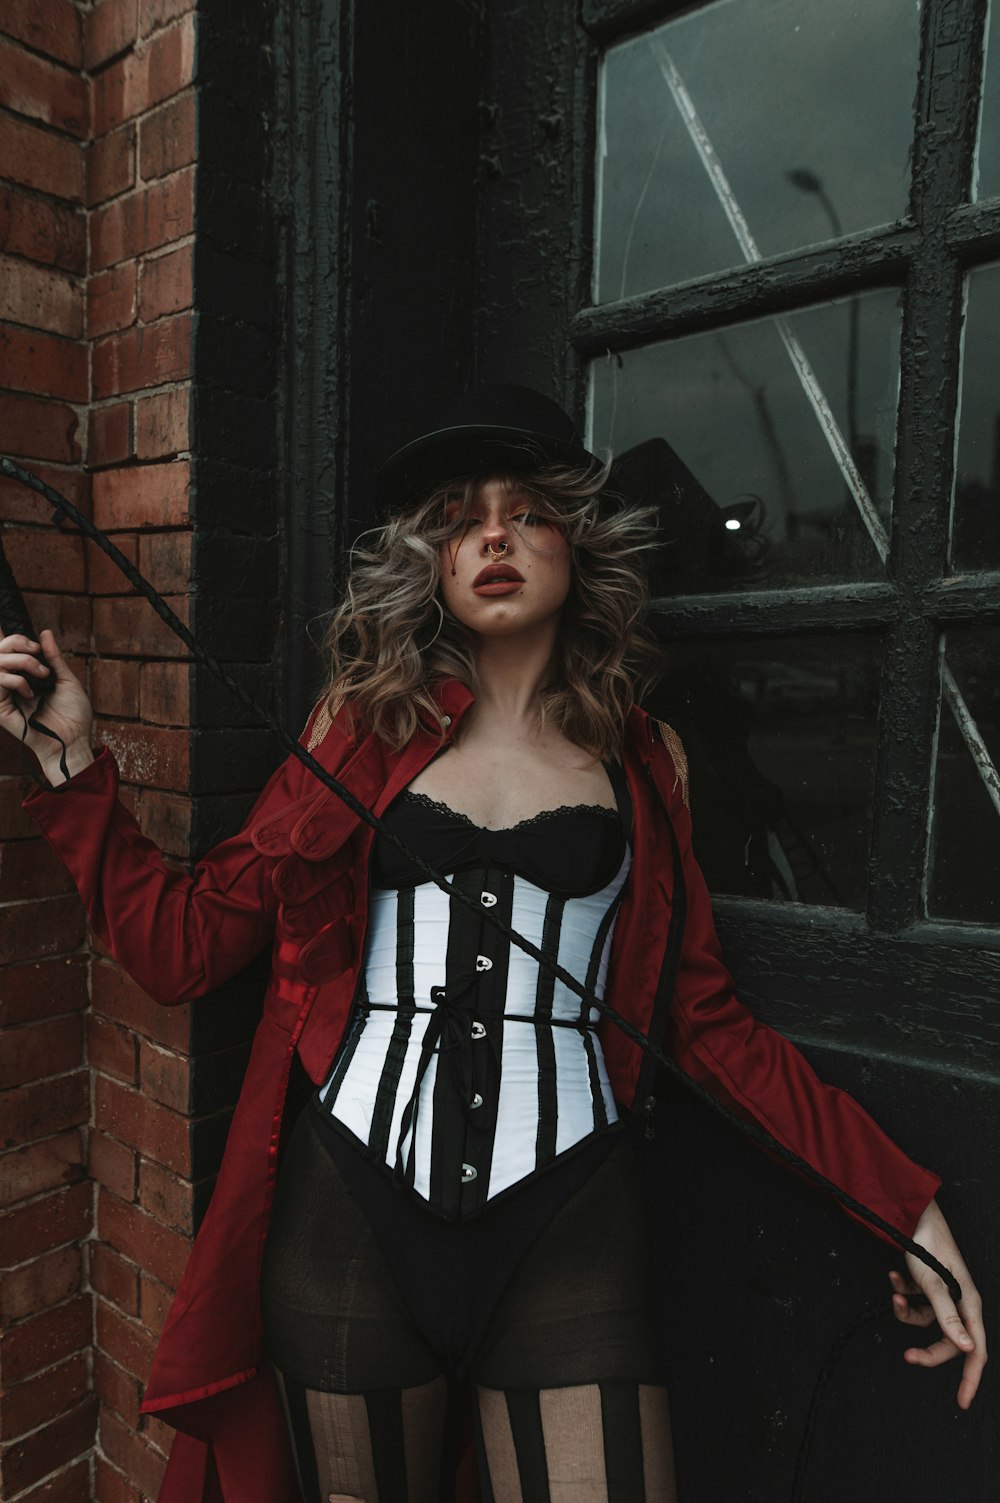 a woman in a corset and hat posing in front of a brick wall